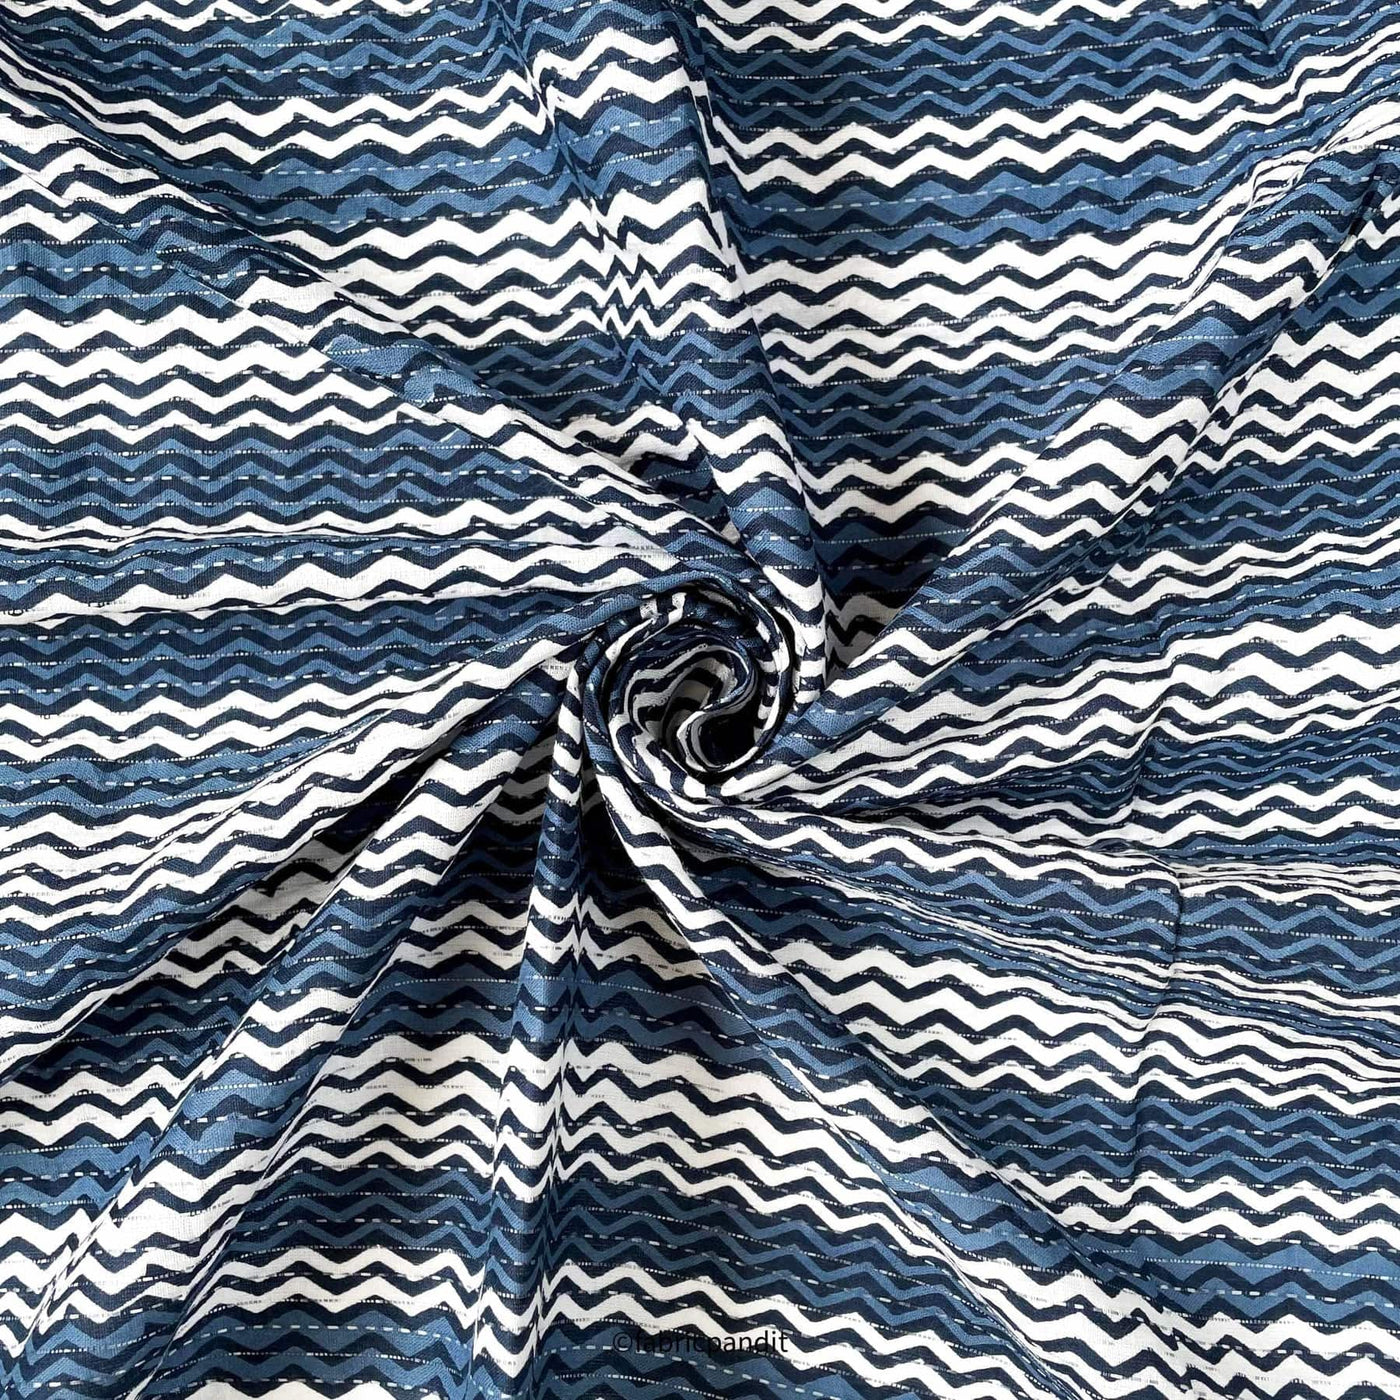 Hand Block Printed Cotton Fabric Cut Piece (CUT PIECE) White & Blue Zig-Zag Stripes Hand Block Printed Pure Cotton Fabric (Width 42 inches)